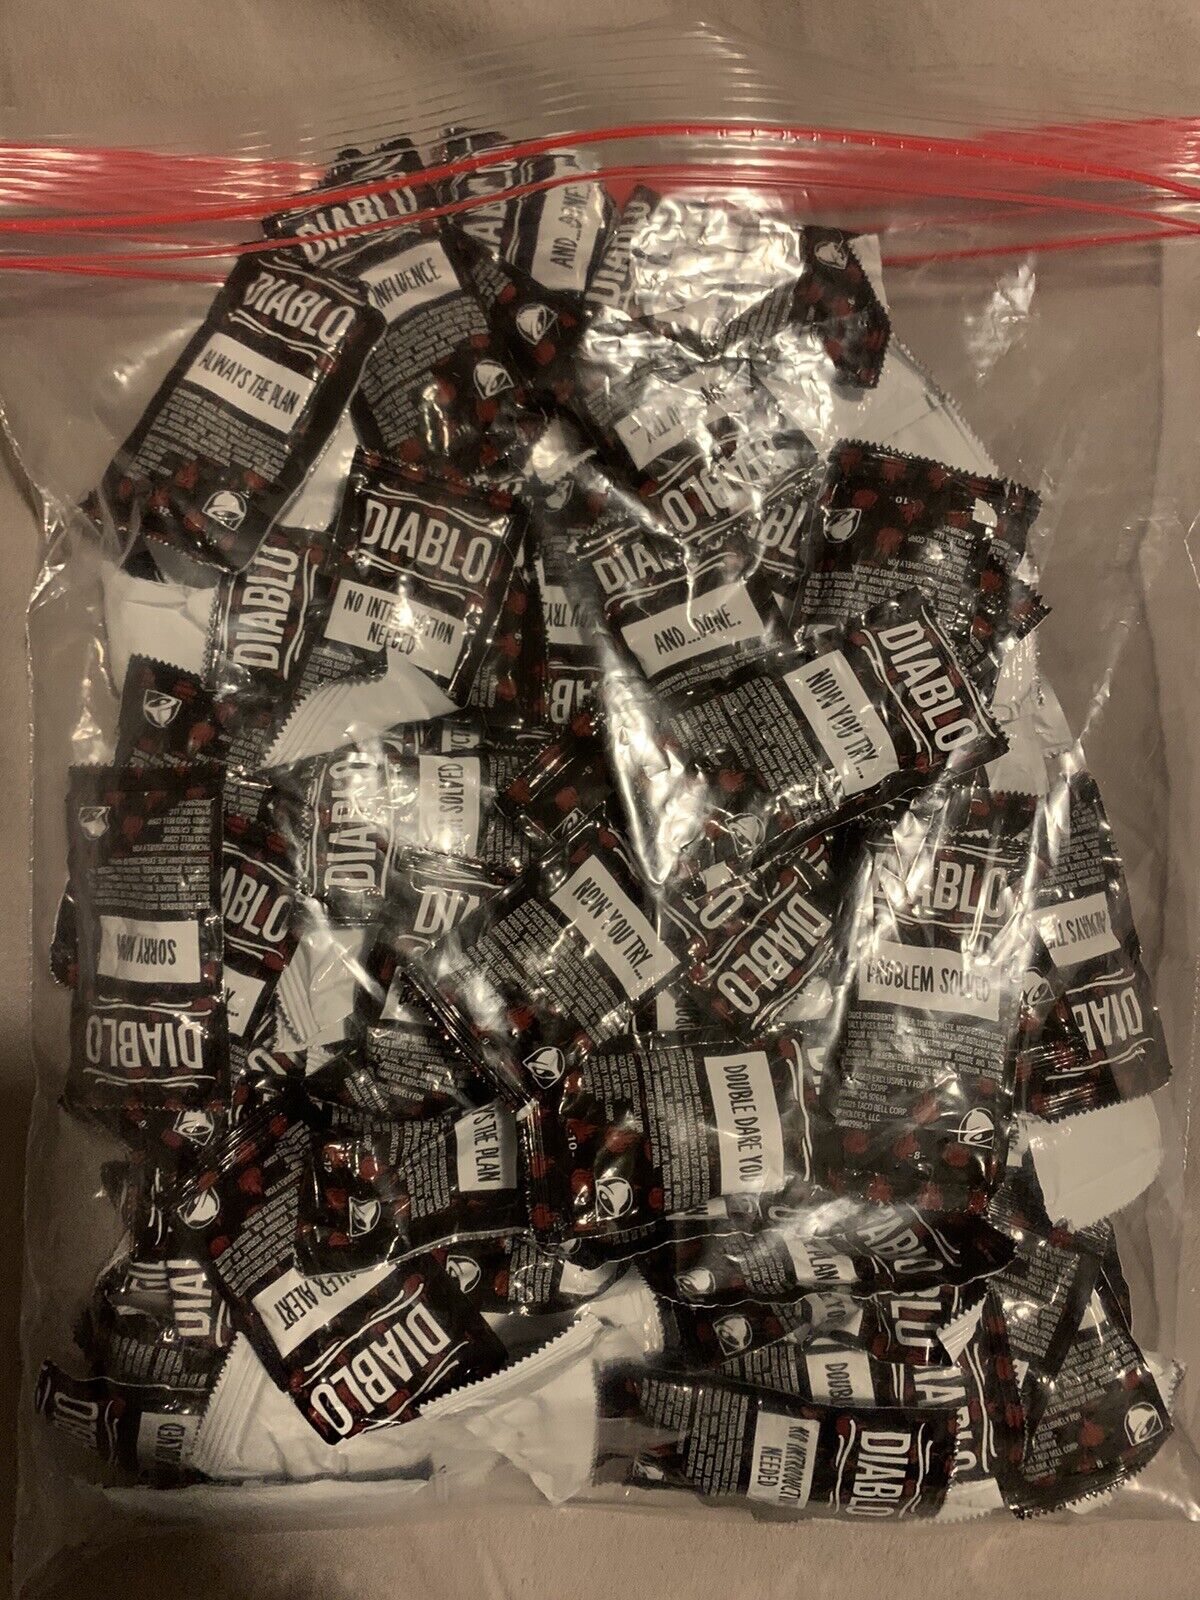 50 Taco Bell DIABLO  Sauce Packets.   New And Sealed Fresh